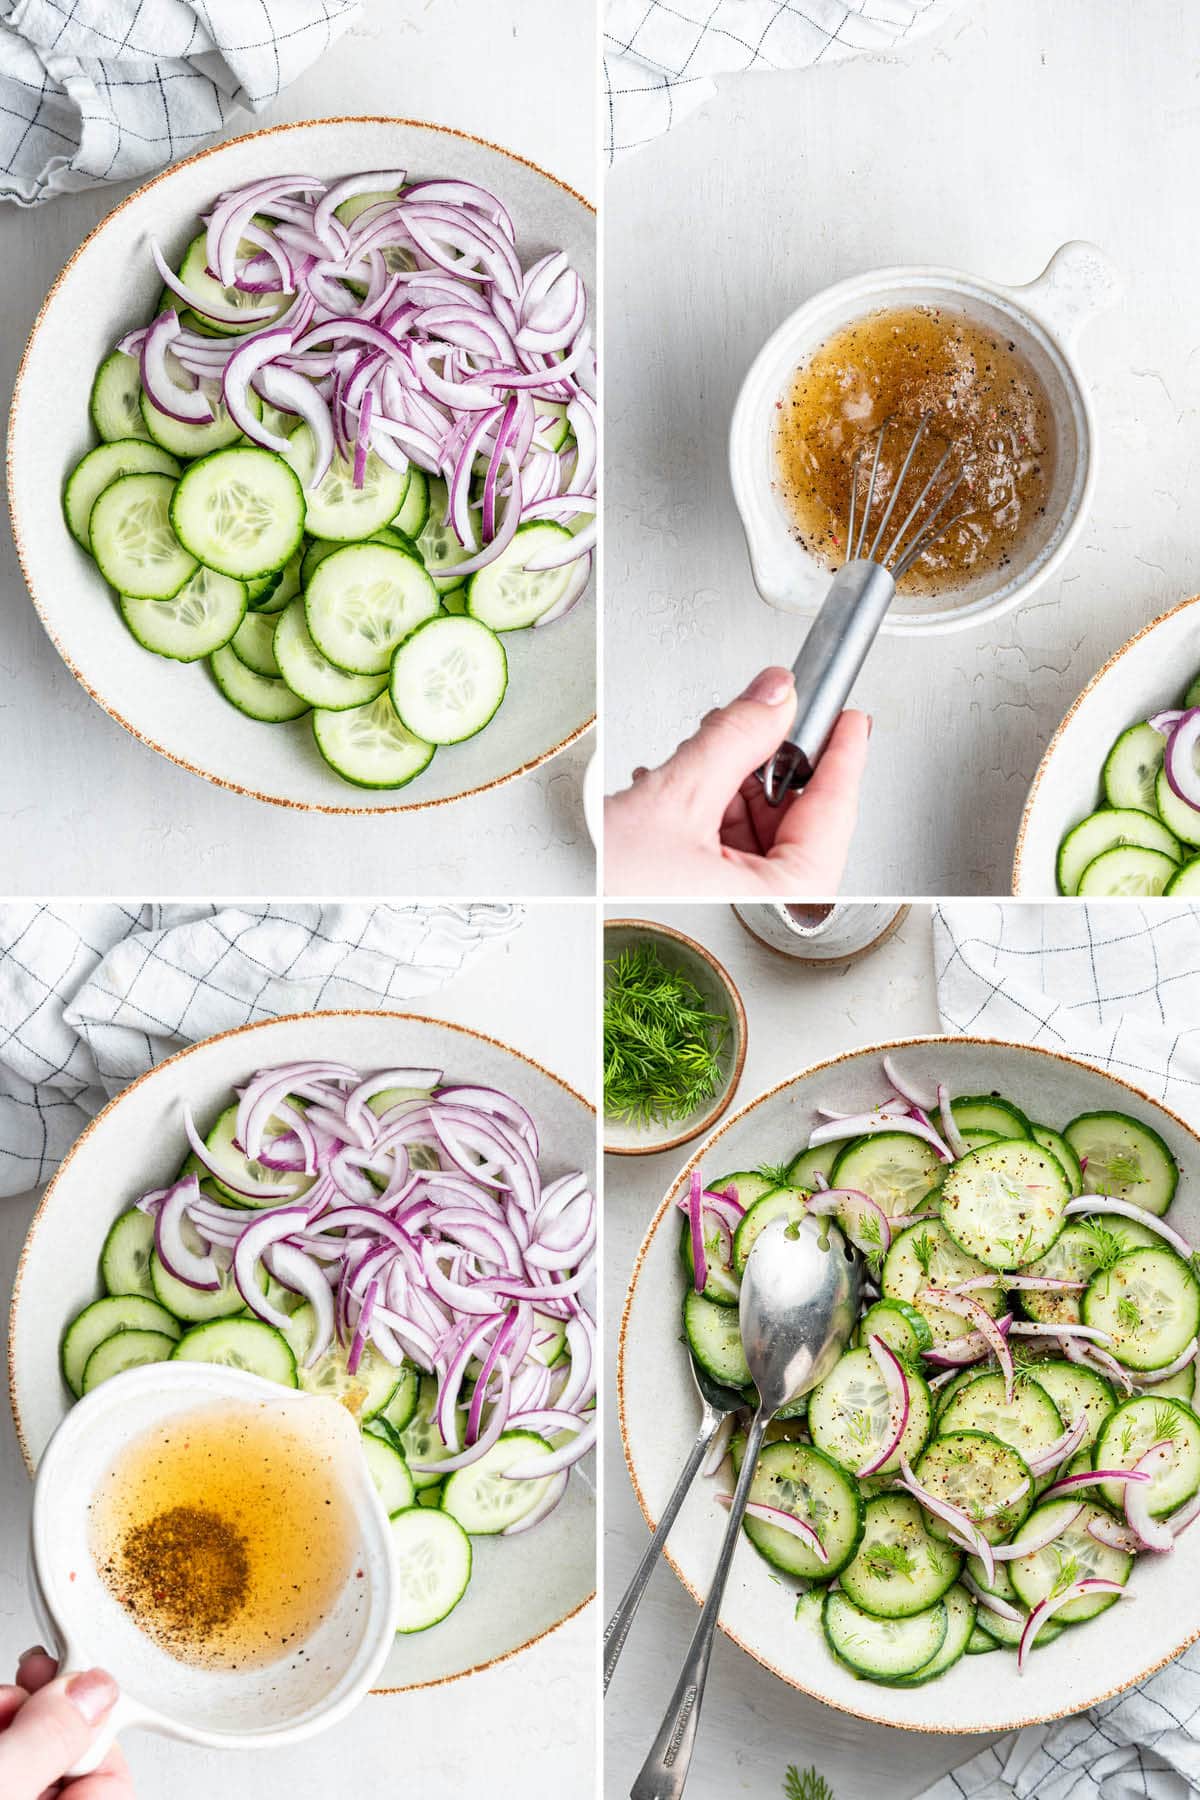 Collage of four process photos showing how to make Cucumber Salad: tossing red onions and cucumbers in a bowl with homemade dressing.